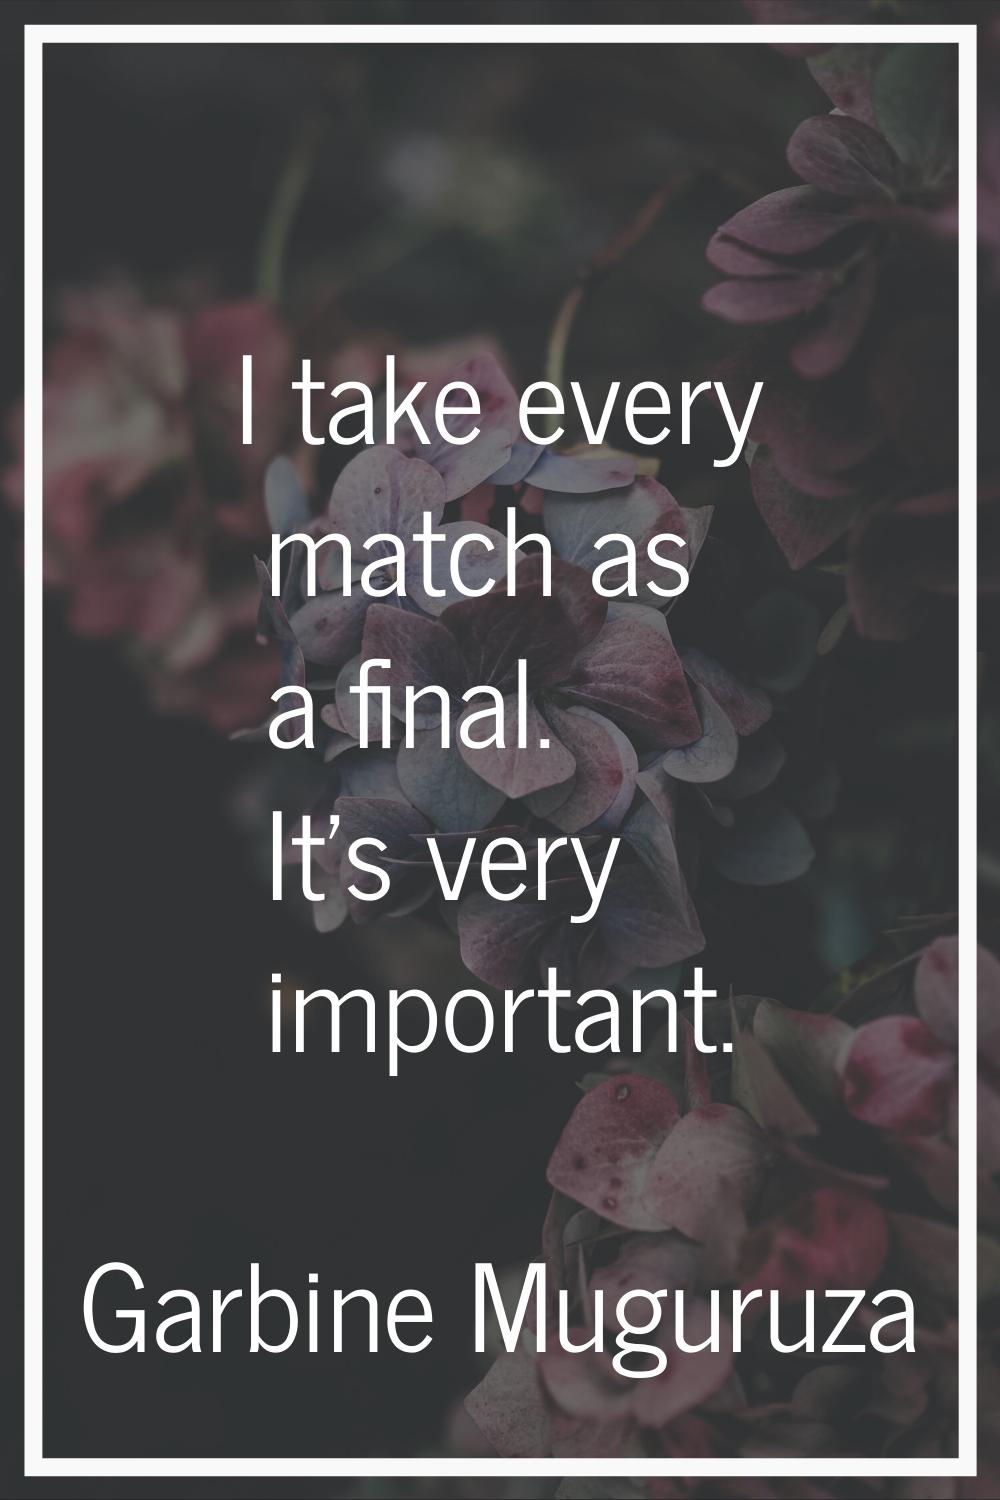 I take every match as a final. It's very important.